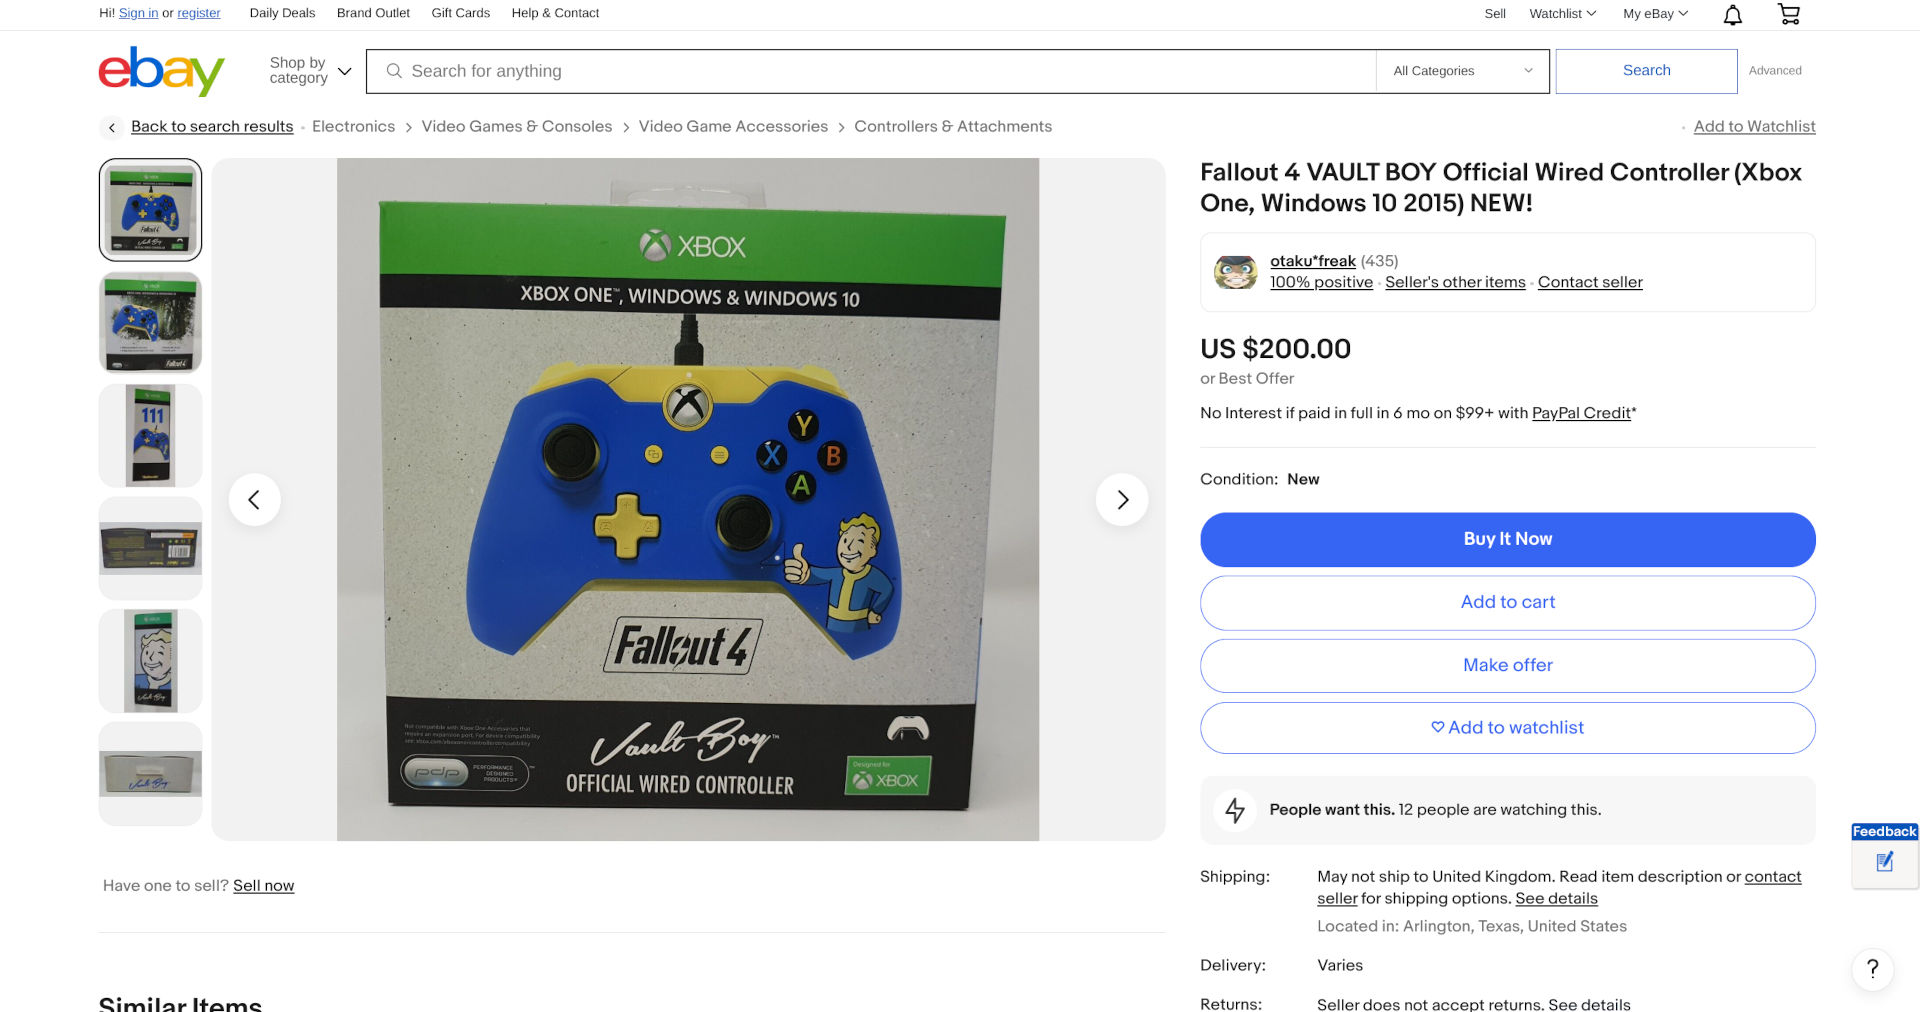 A listing on eBay for the Fallout 4 Vault Boy controller